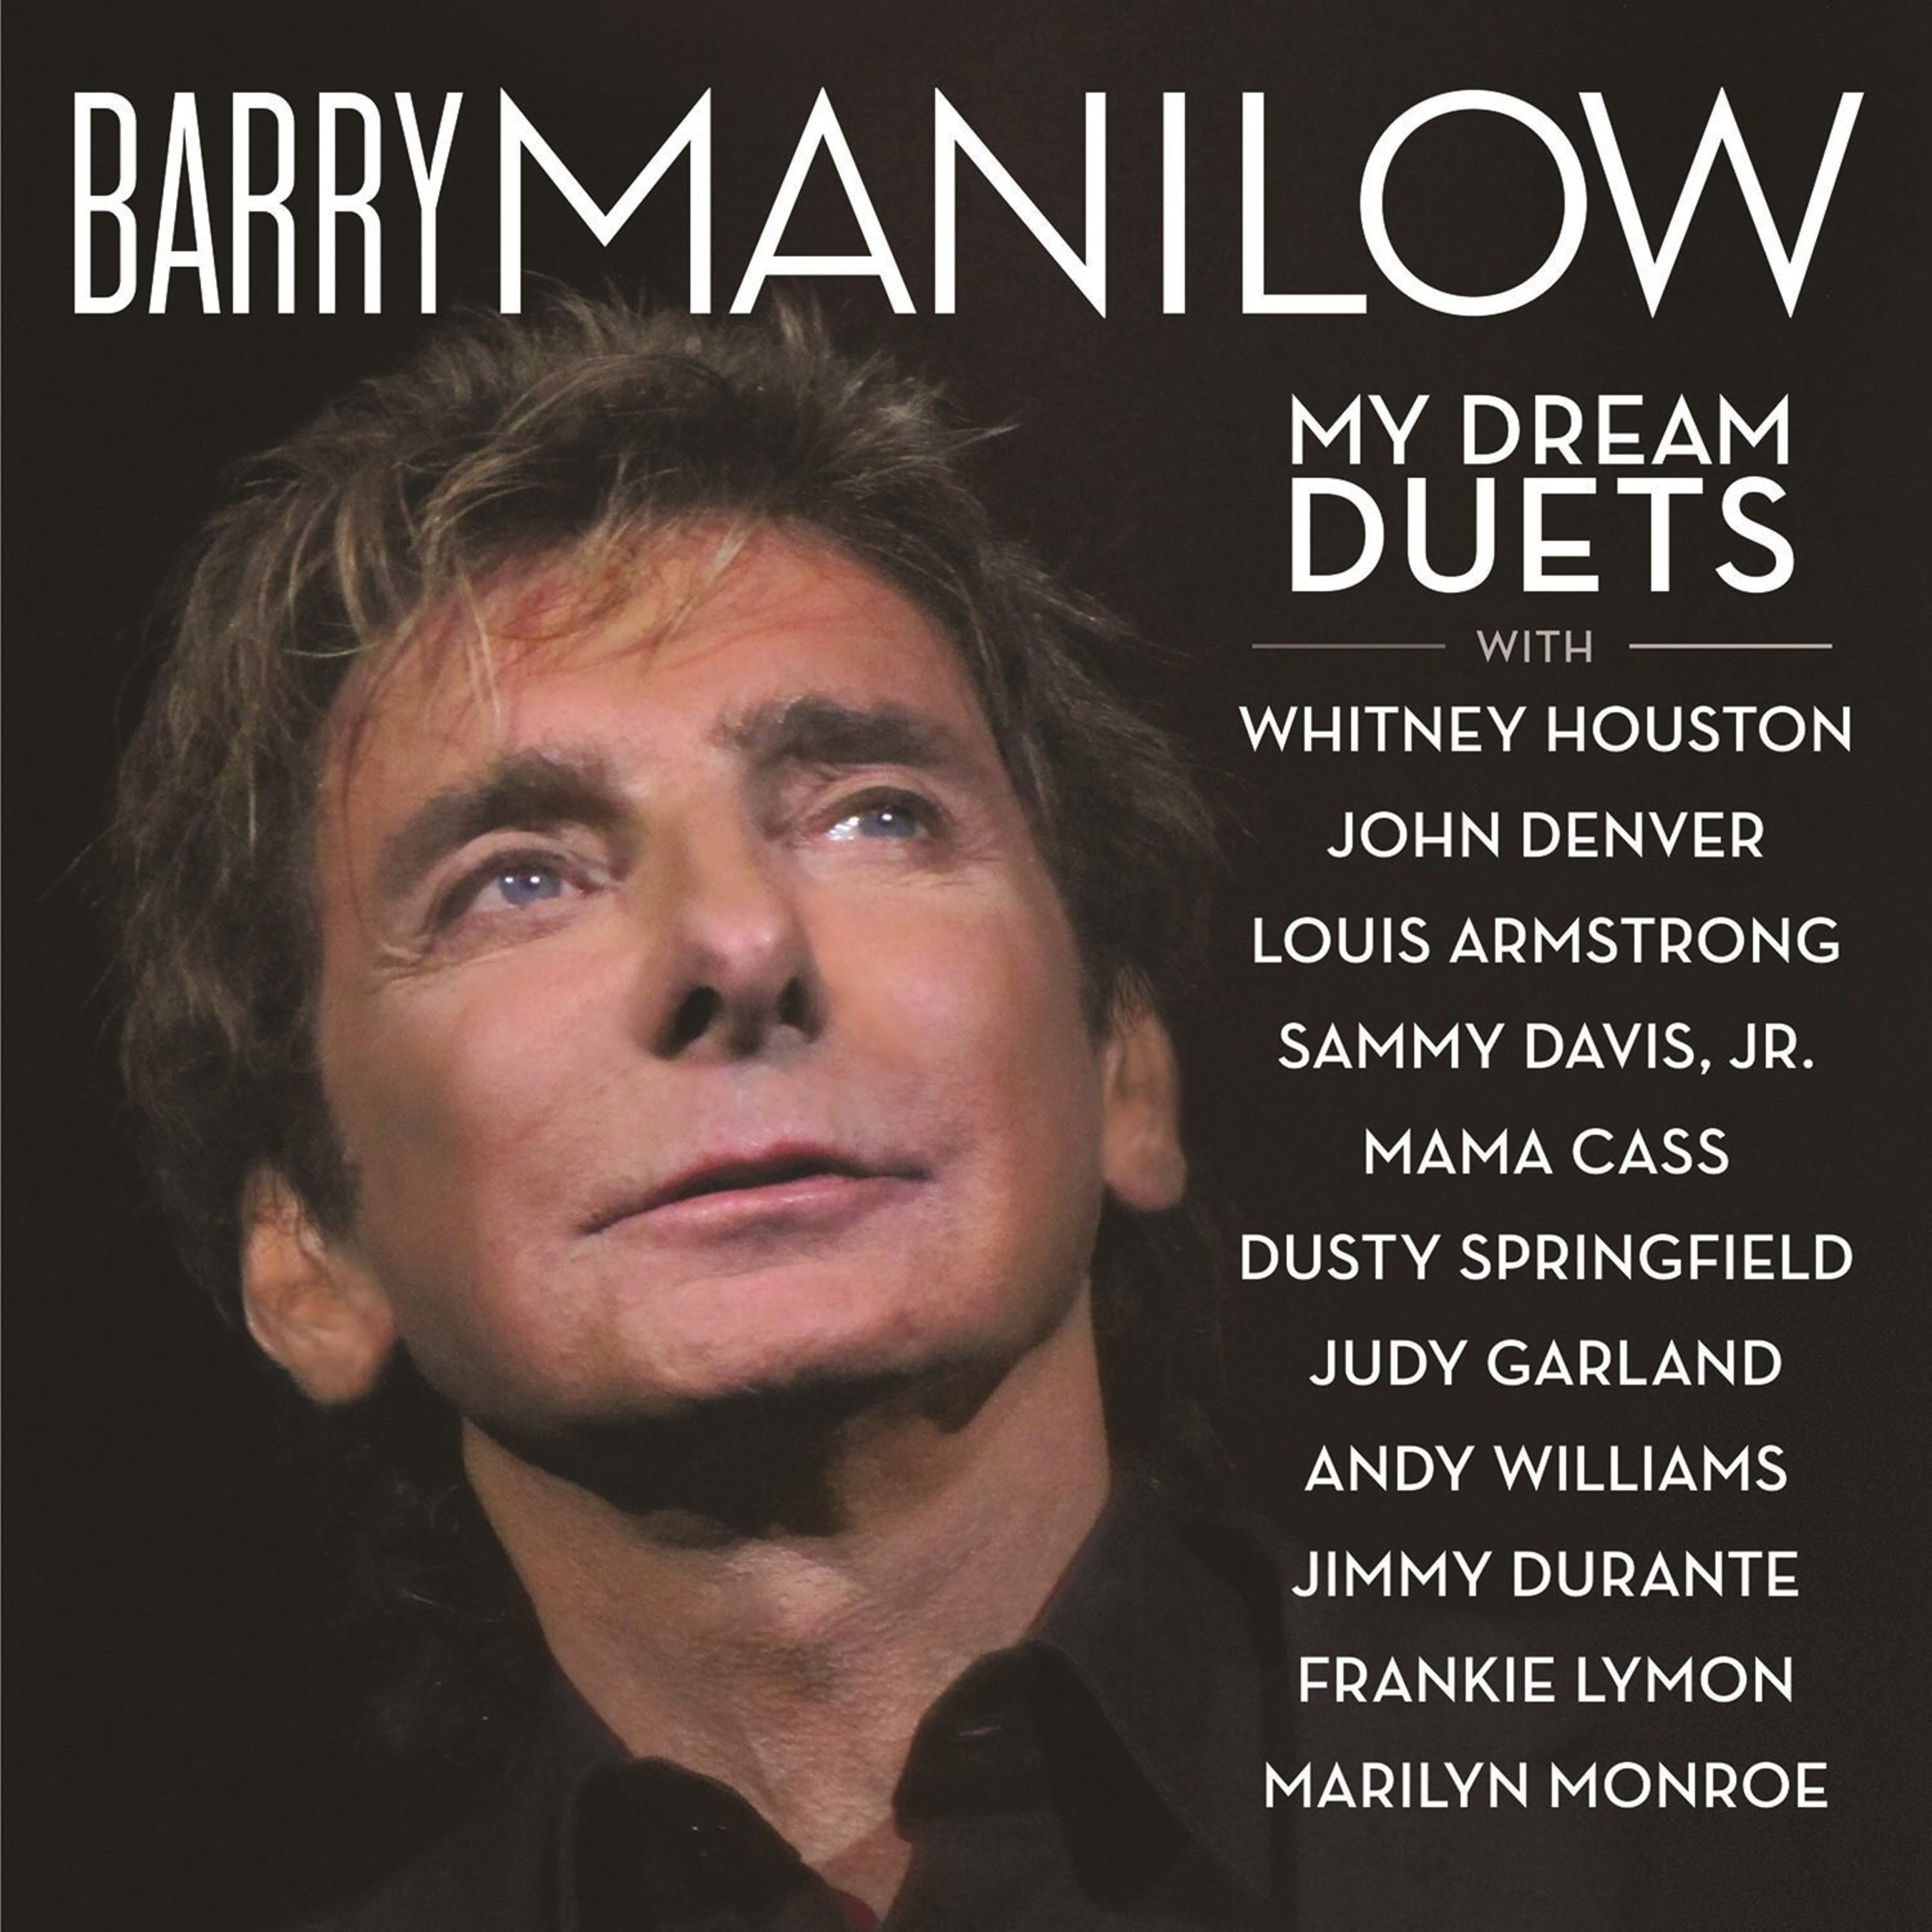 Barry Manilow Receives 15th GRAMMY Nomination for MY DREAM DUETS